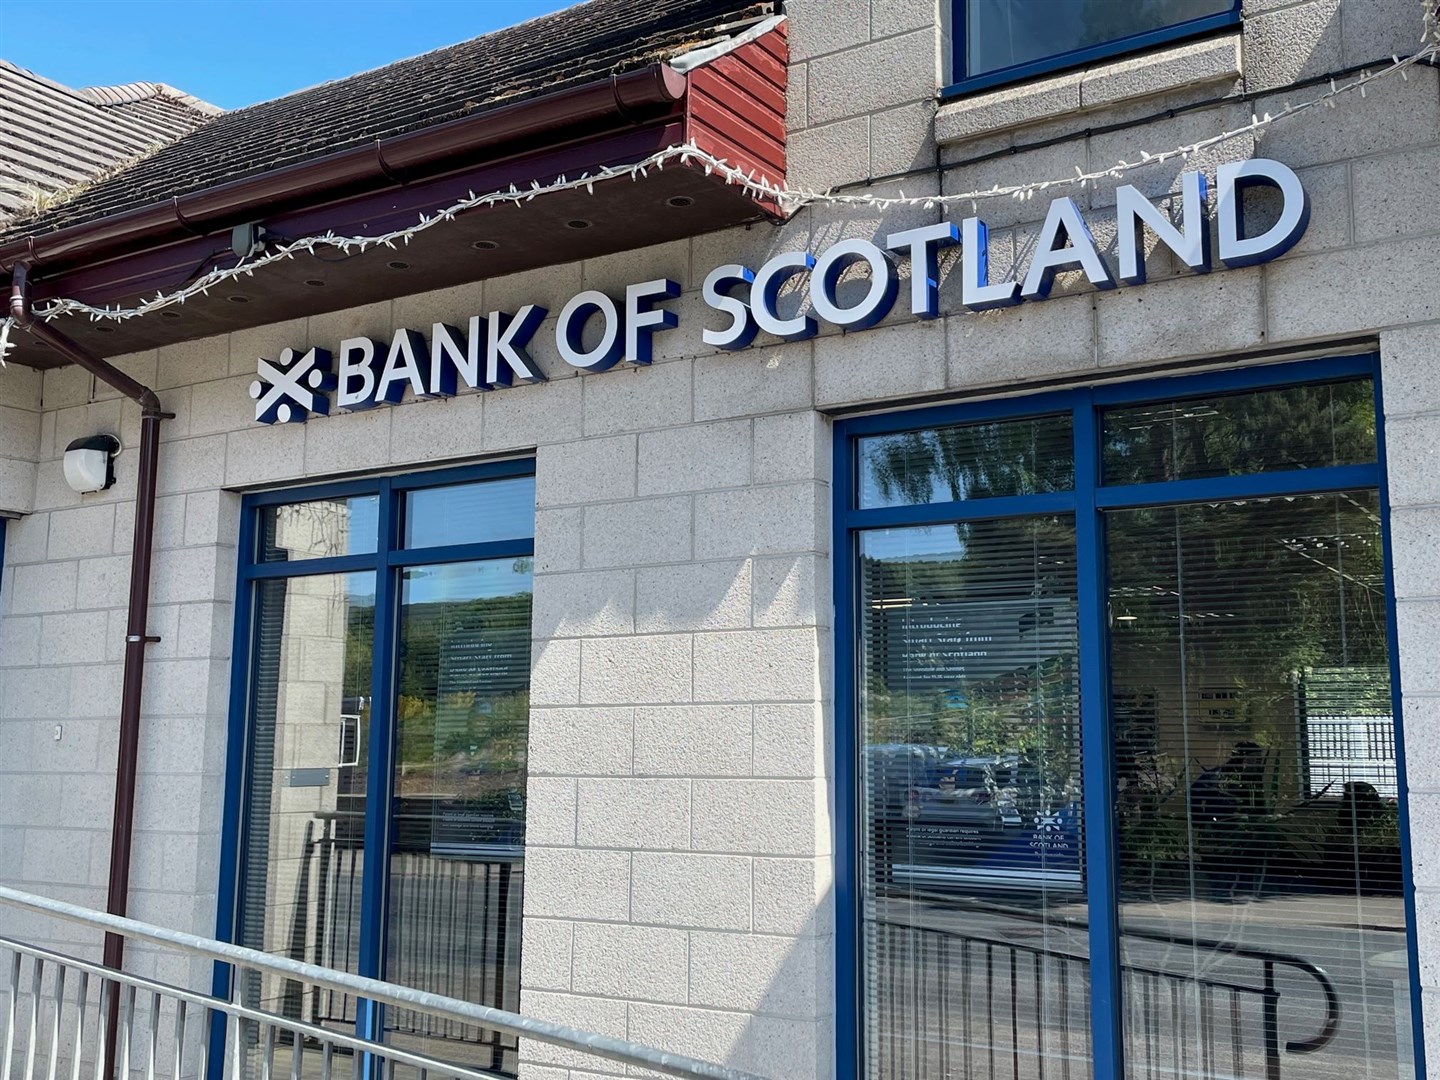 The Bank of Scotland had been a long time prescence in the centre of Aviemore.